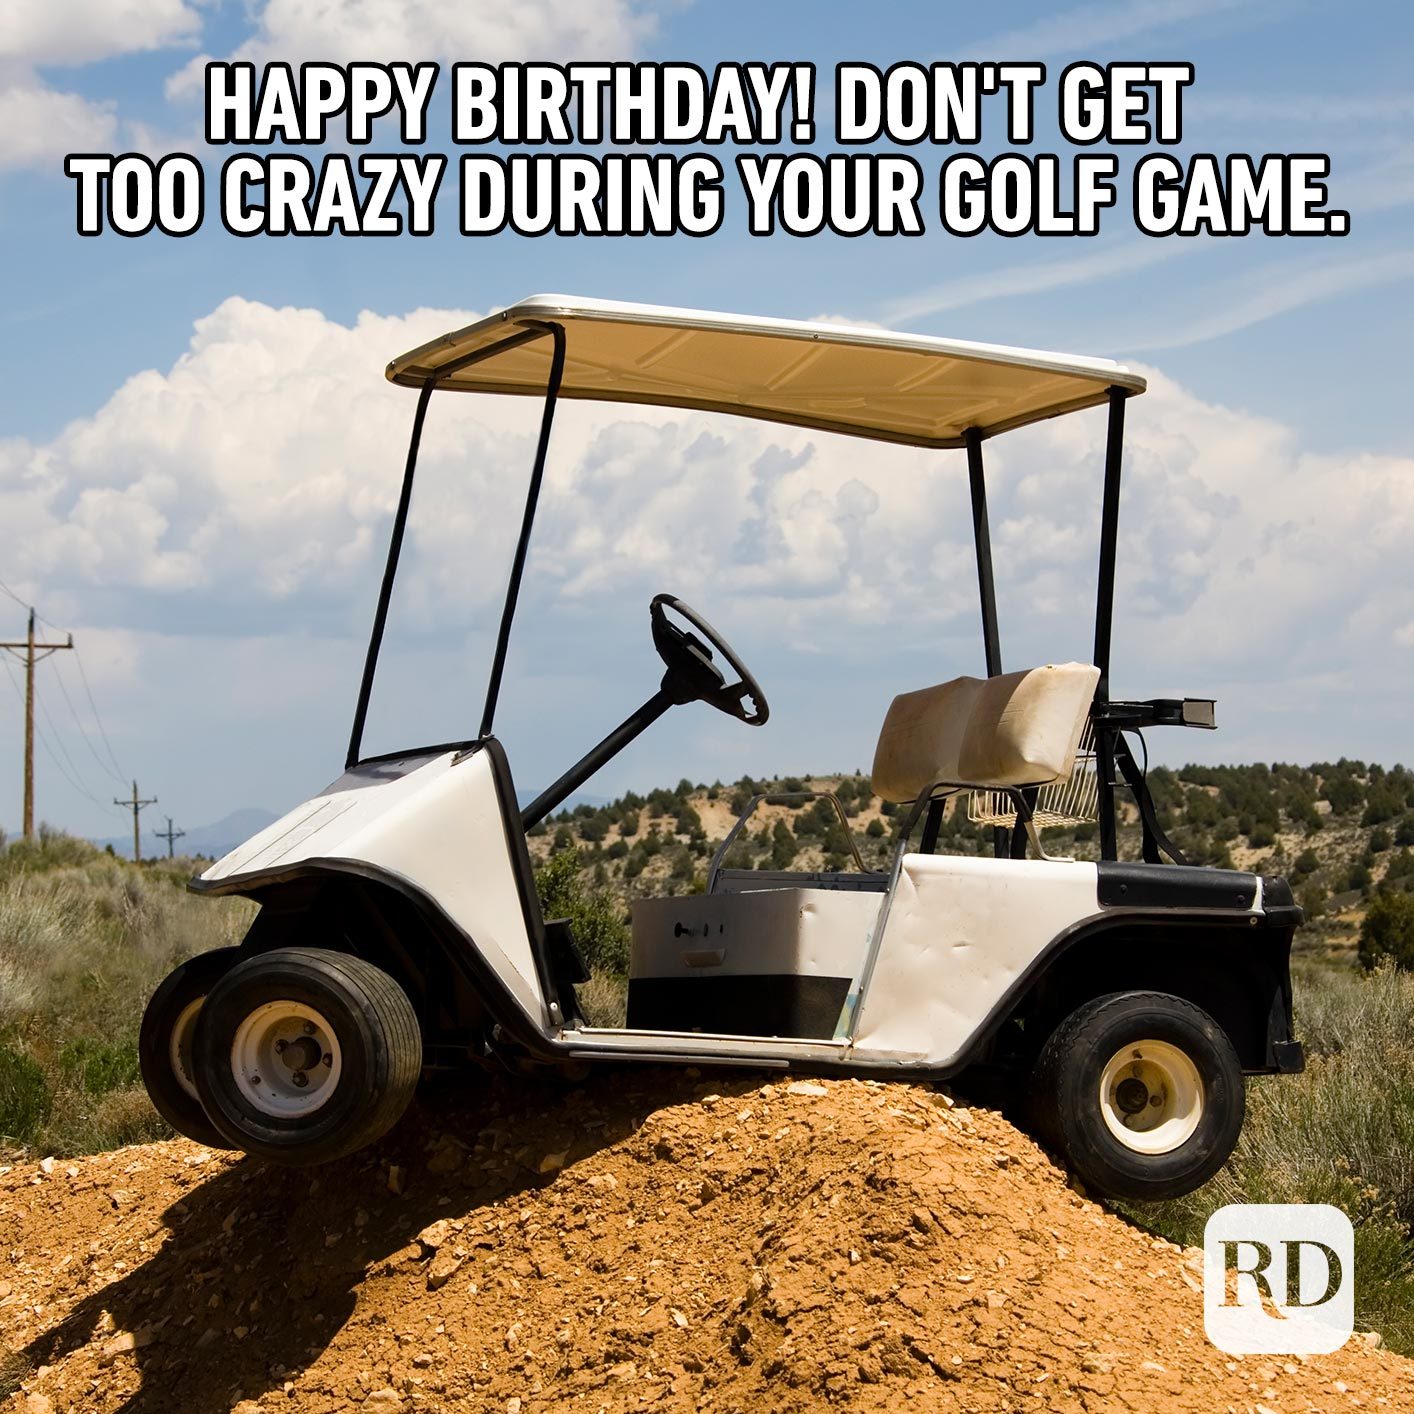 Happy Birthday! Don't get too crazy during your golf game.